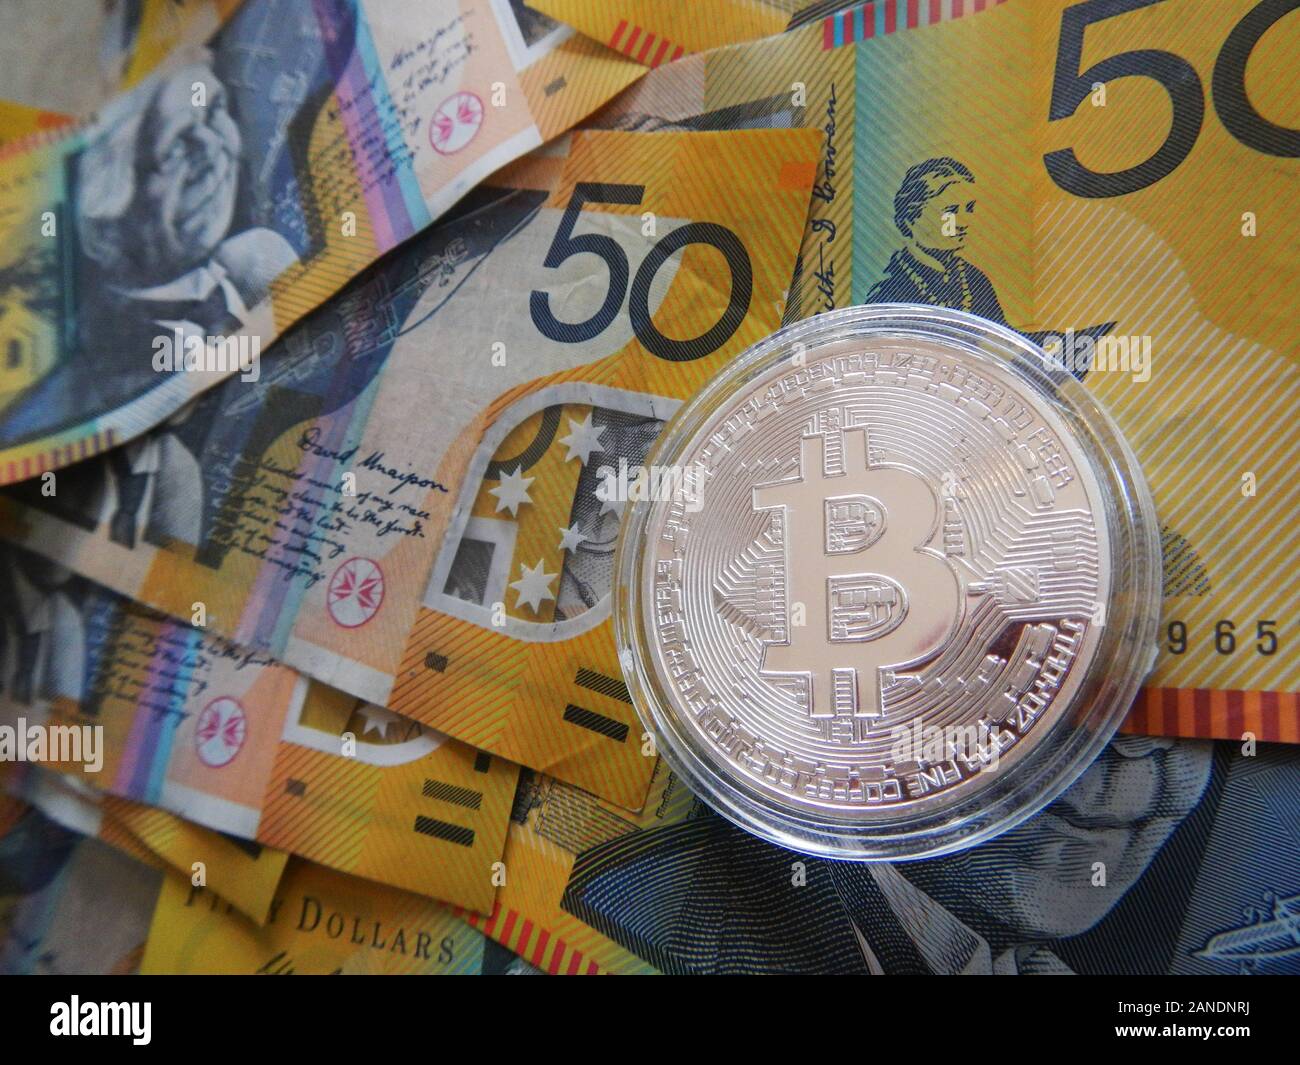 eksplicit buffet forhistorisk Page 2 - Australian Fifty Dollar Note High Resolution Stock Photography and  Images - Alamy